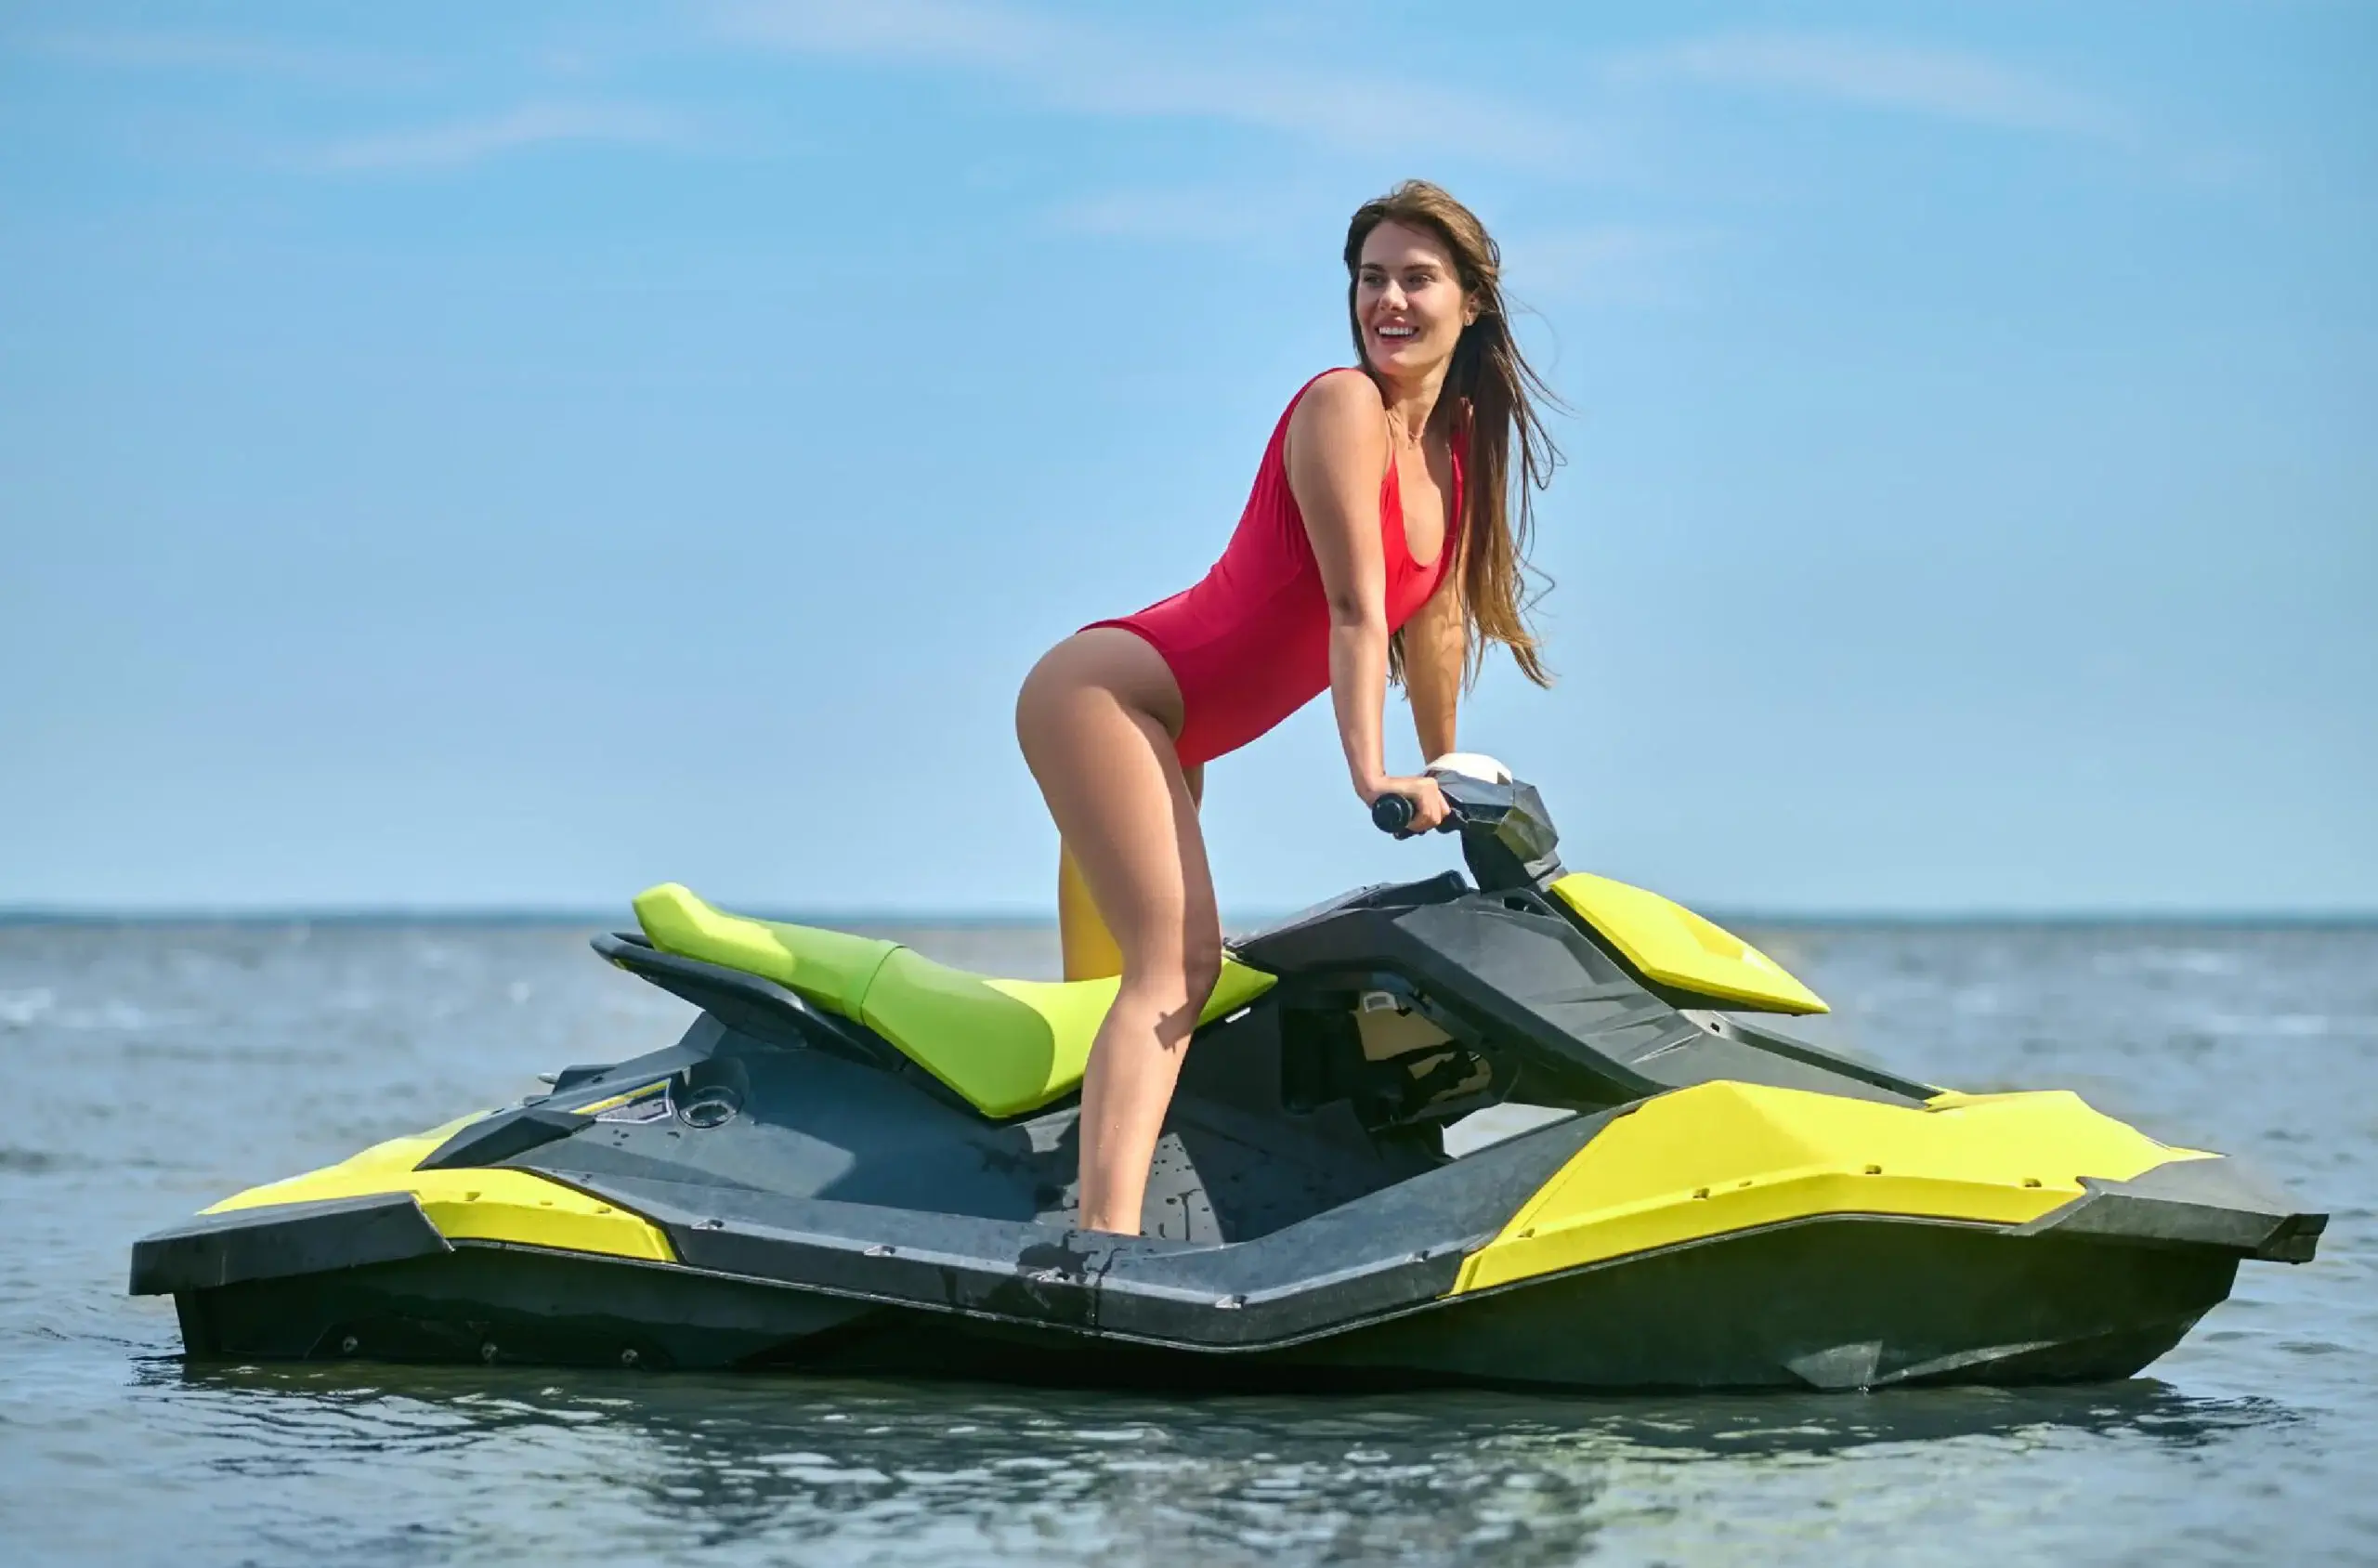 Feel rush of waves by booking Jet Ski Ride Water Sports